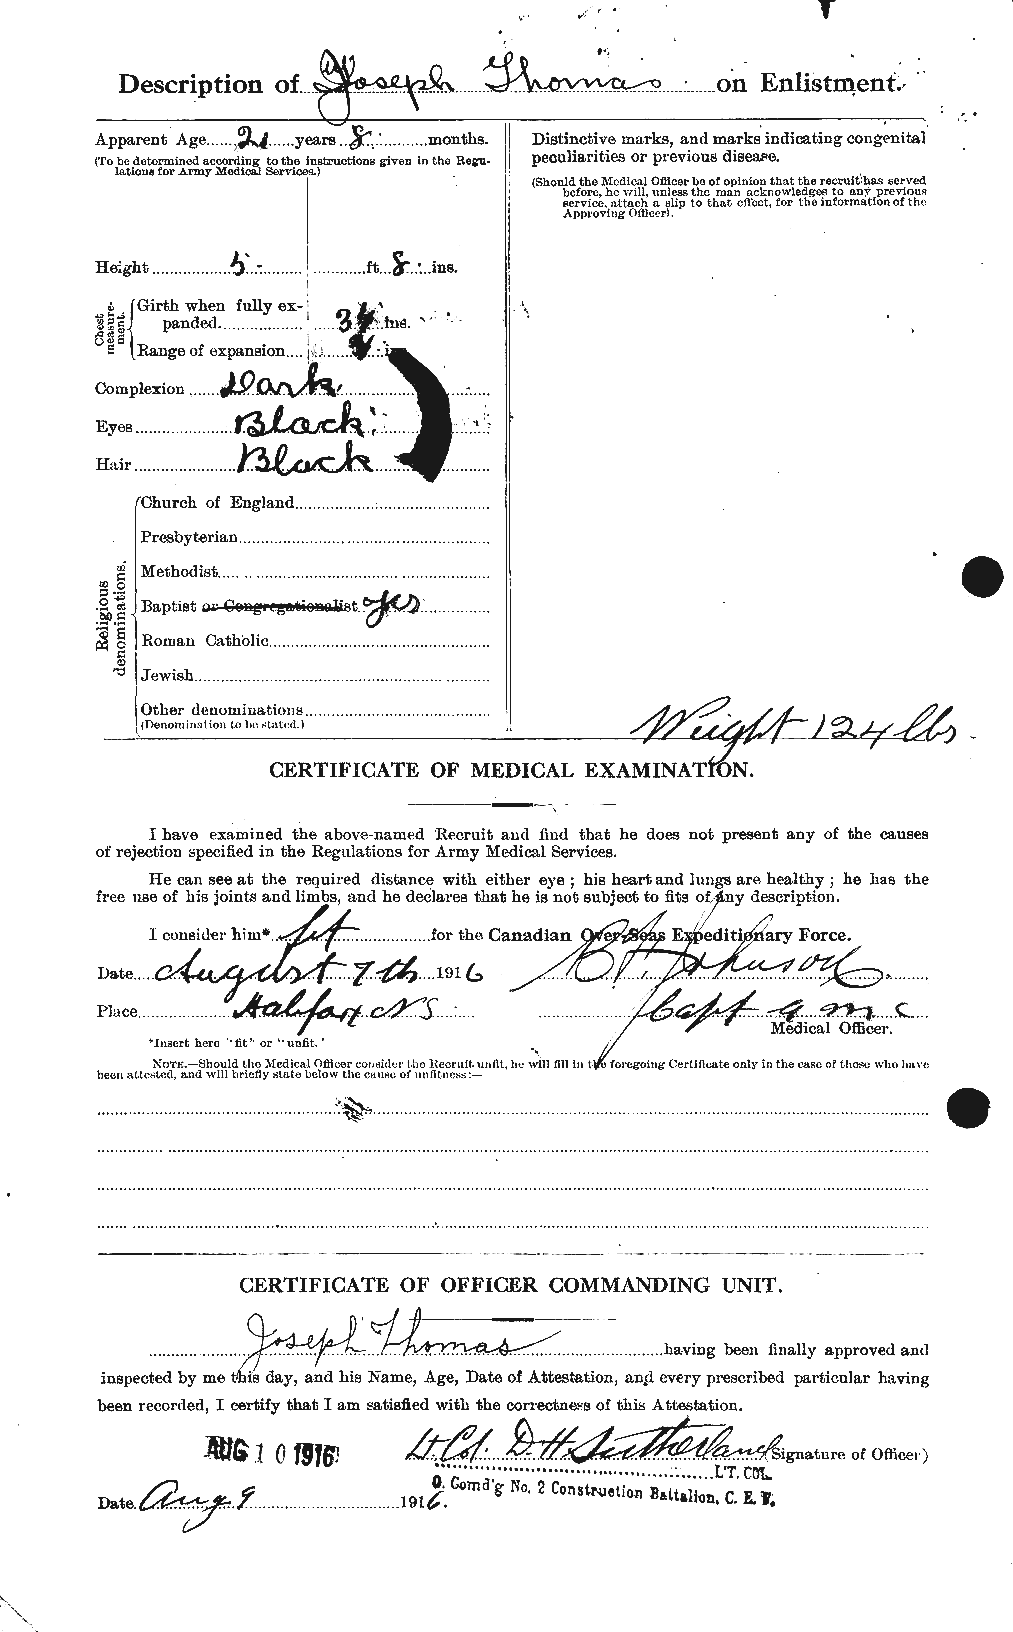 Personnel Records of the First World War - CEF 632479b